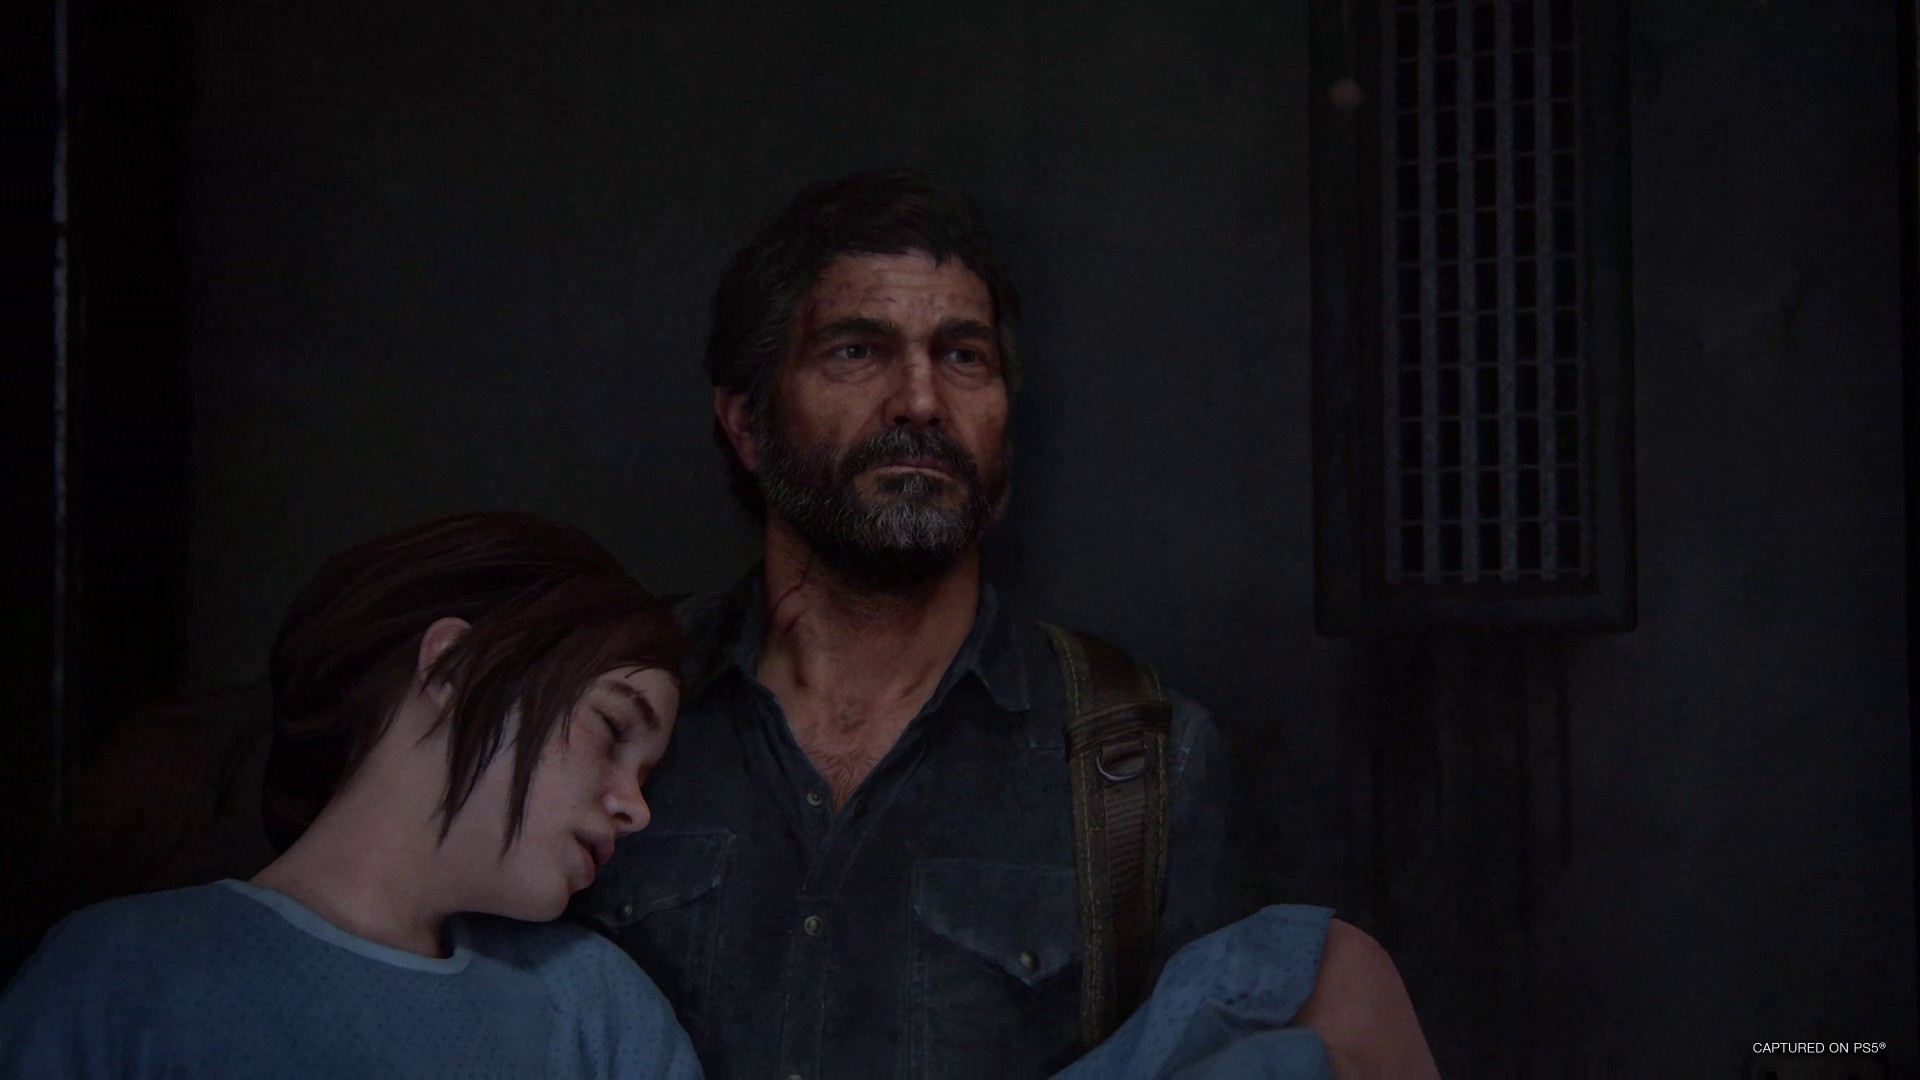 The Last of Us Part II Remastered - PS5 Games